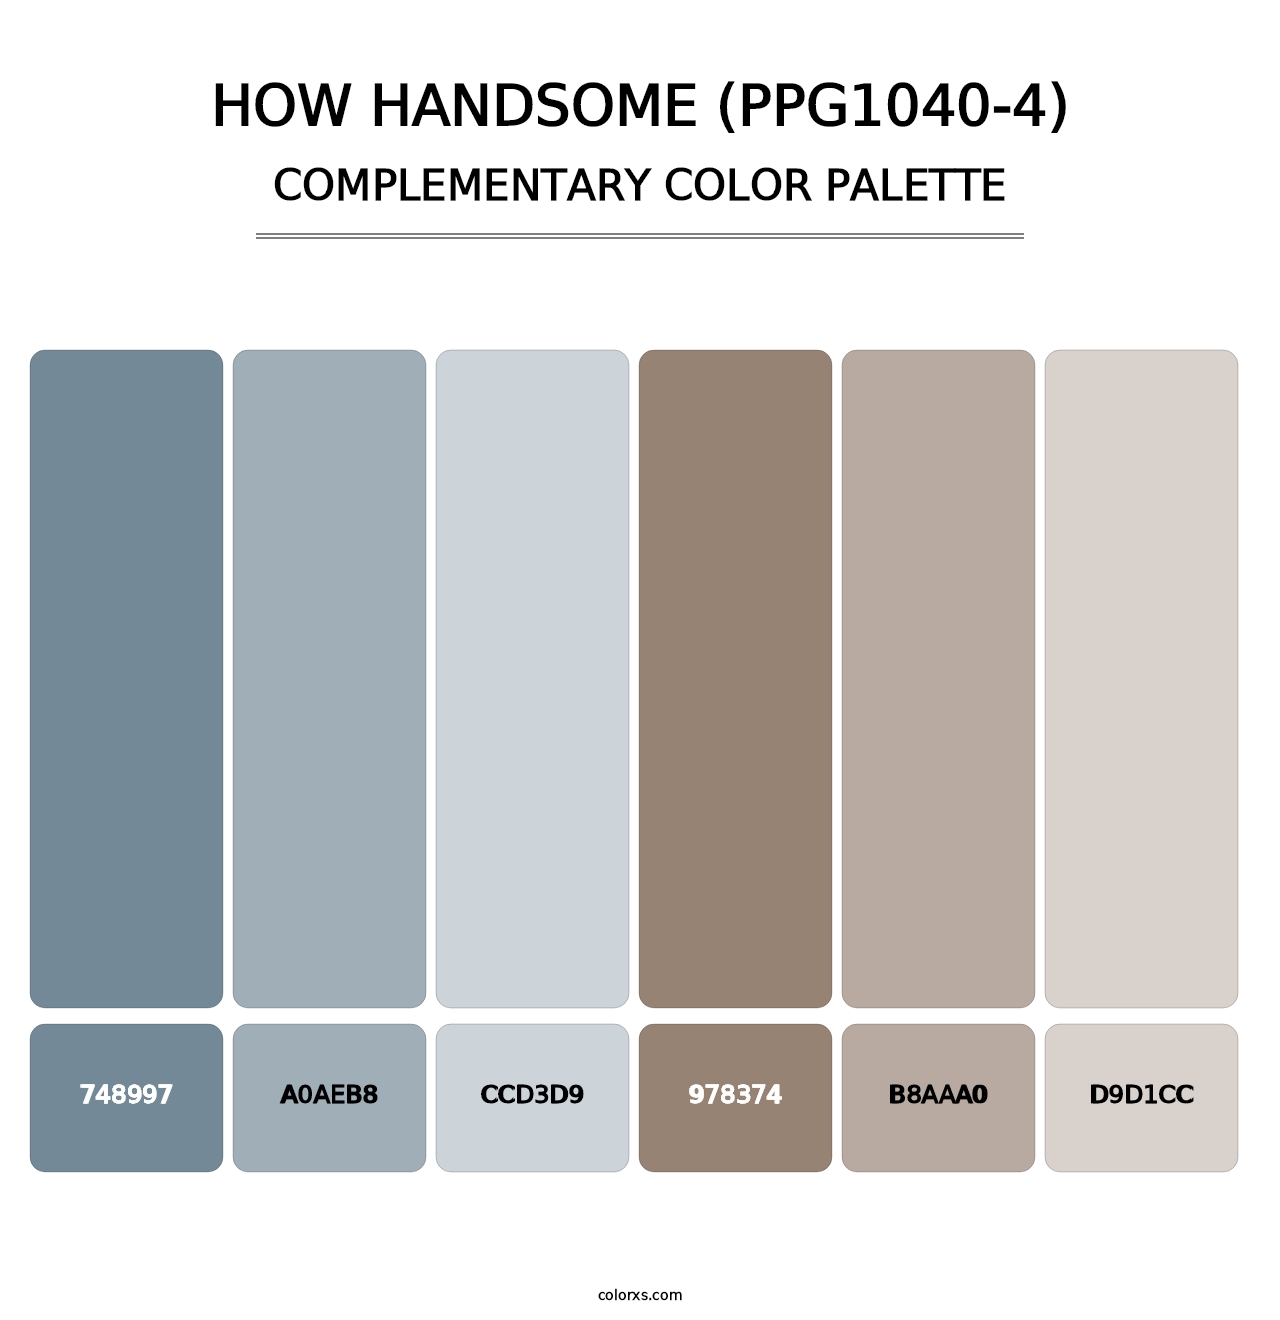 How Handsome (PPG1040-4) - Complementary Color Palette